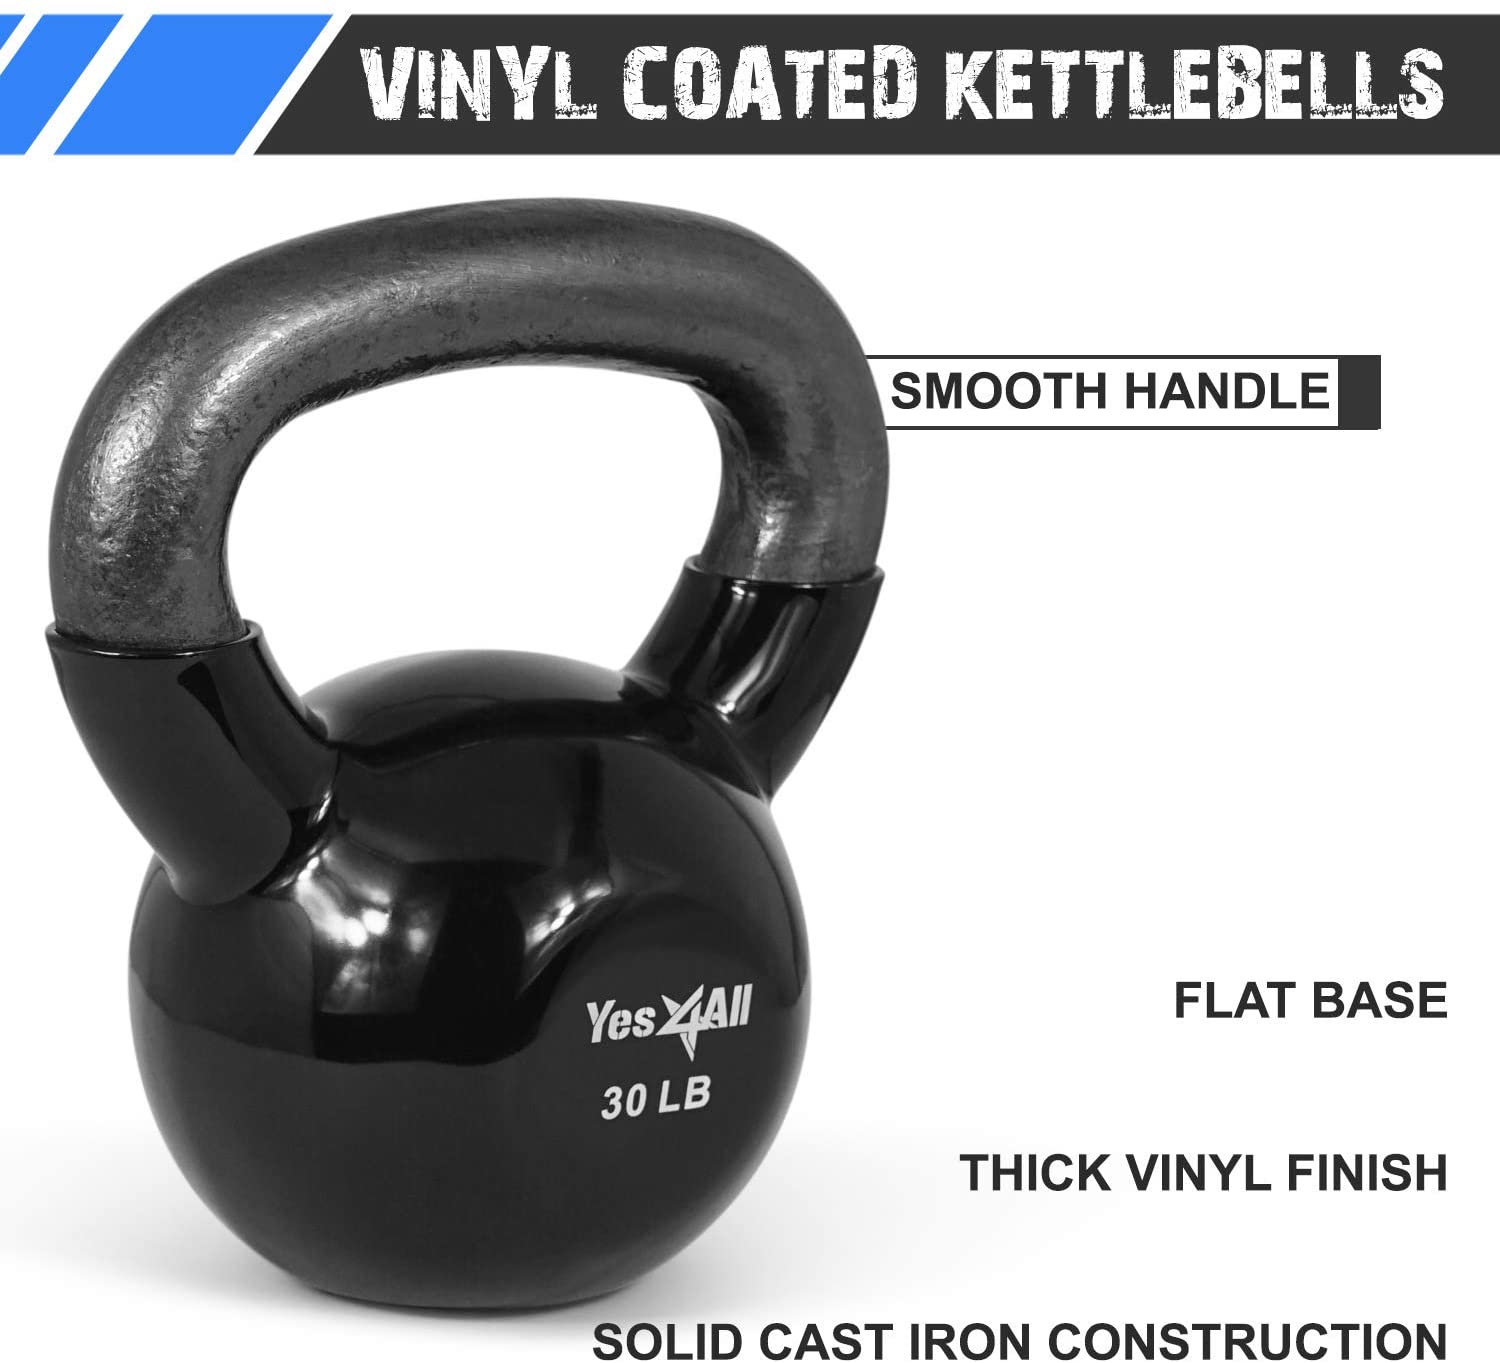 Yes4All 45 lb Vinyl Coated / PVC Kettlebell, Black, Combo / Set, Includes 10-20lb - image 4 of 8